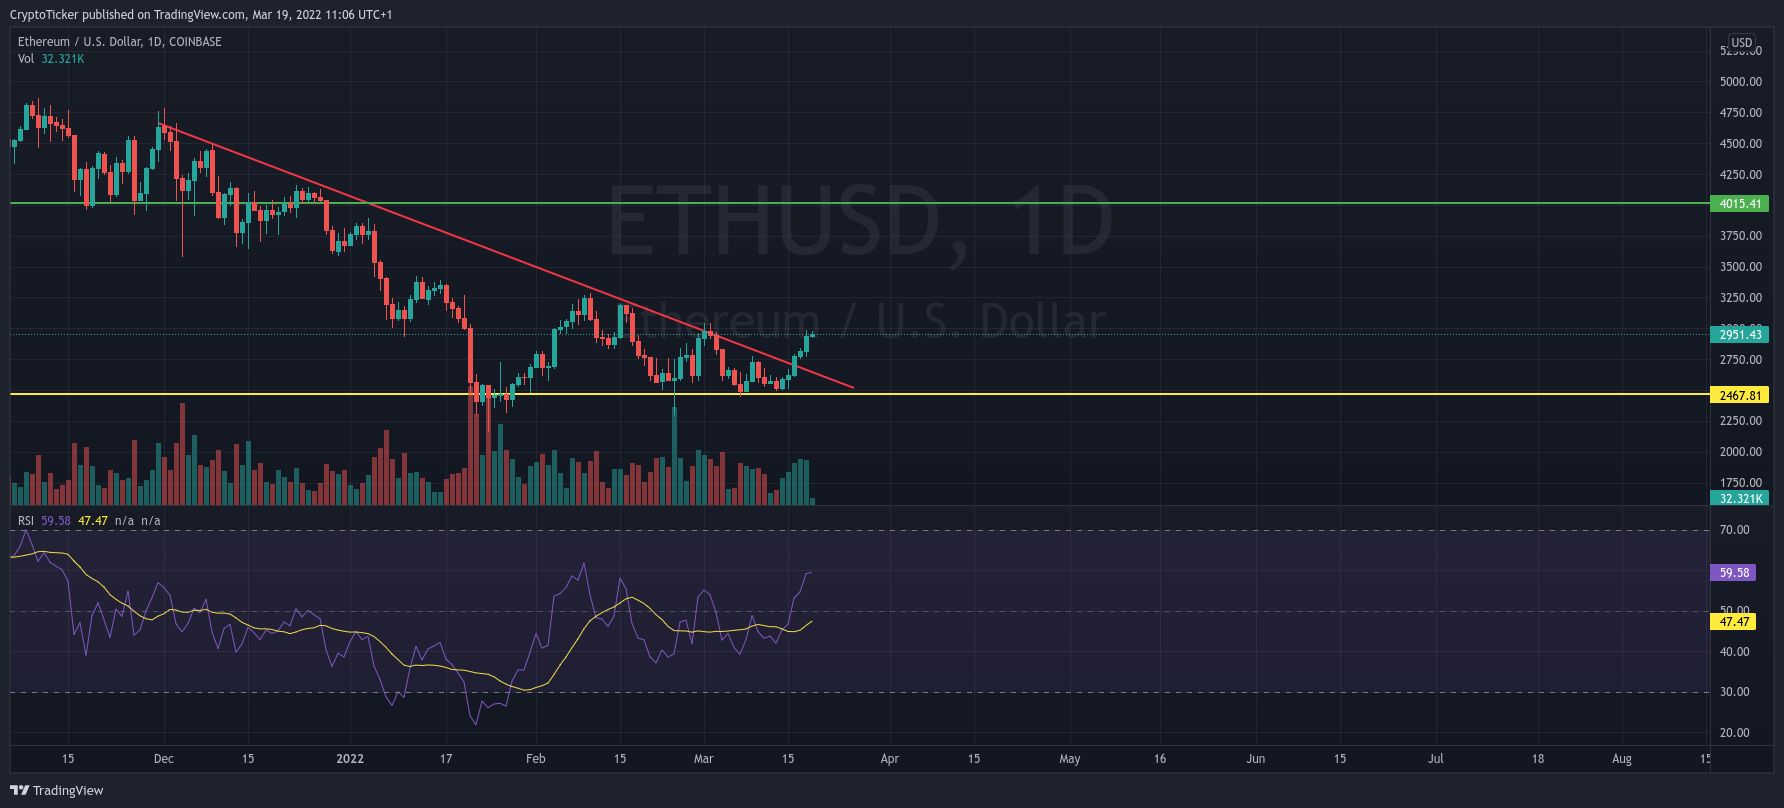 ETH/USD 1-day chart showing the break of the downtrend of ETH